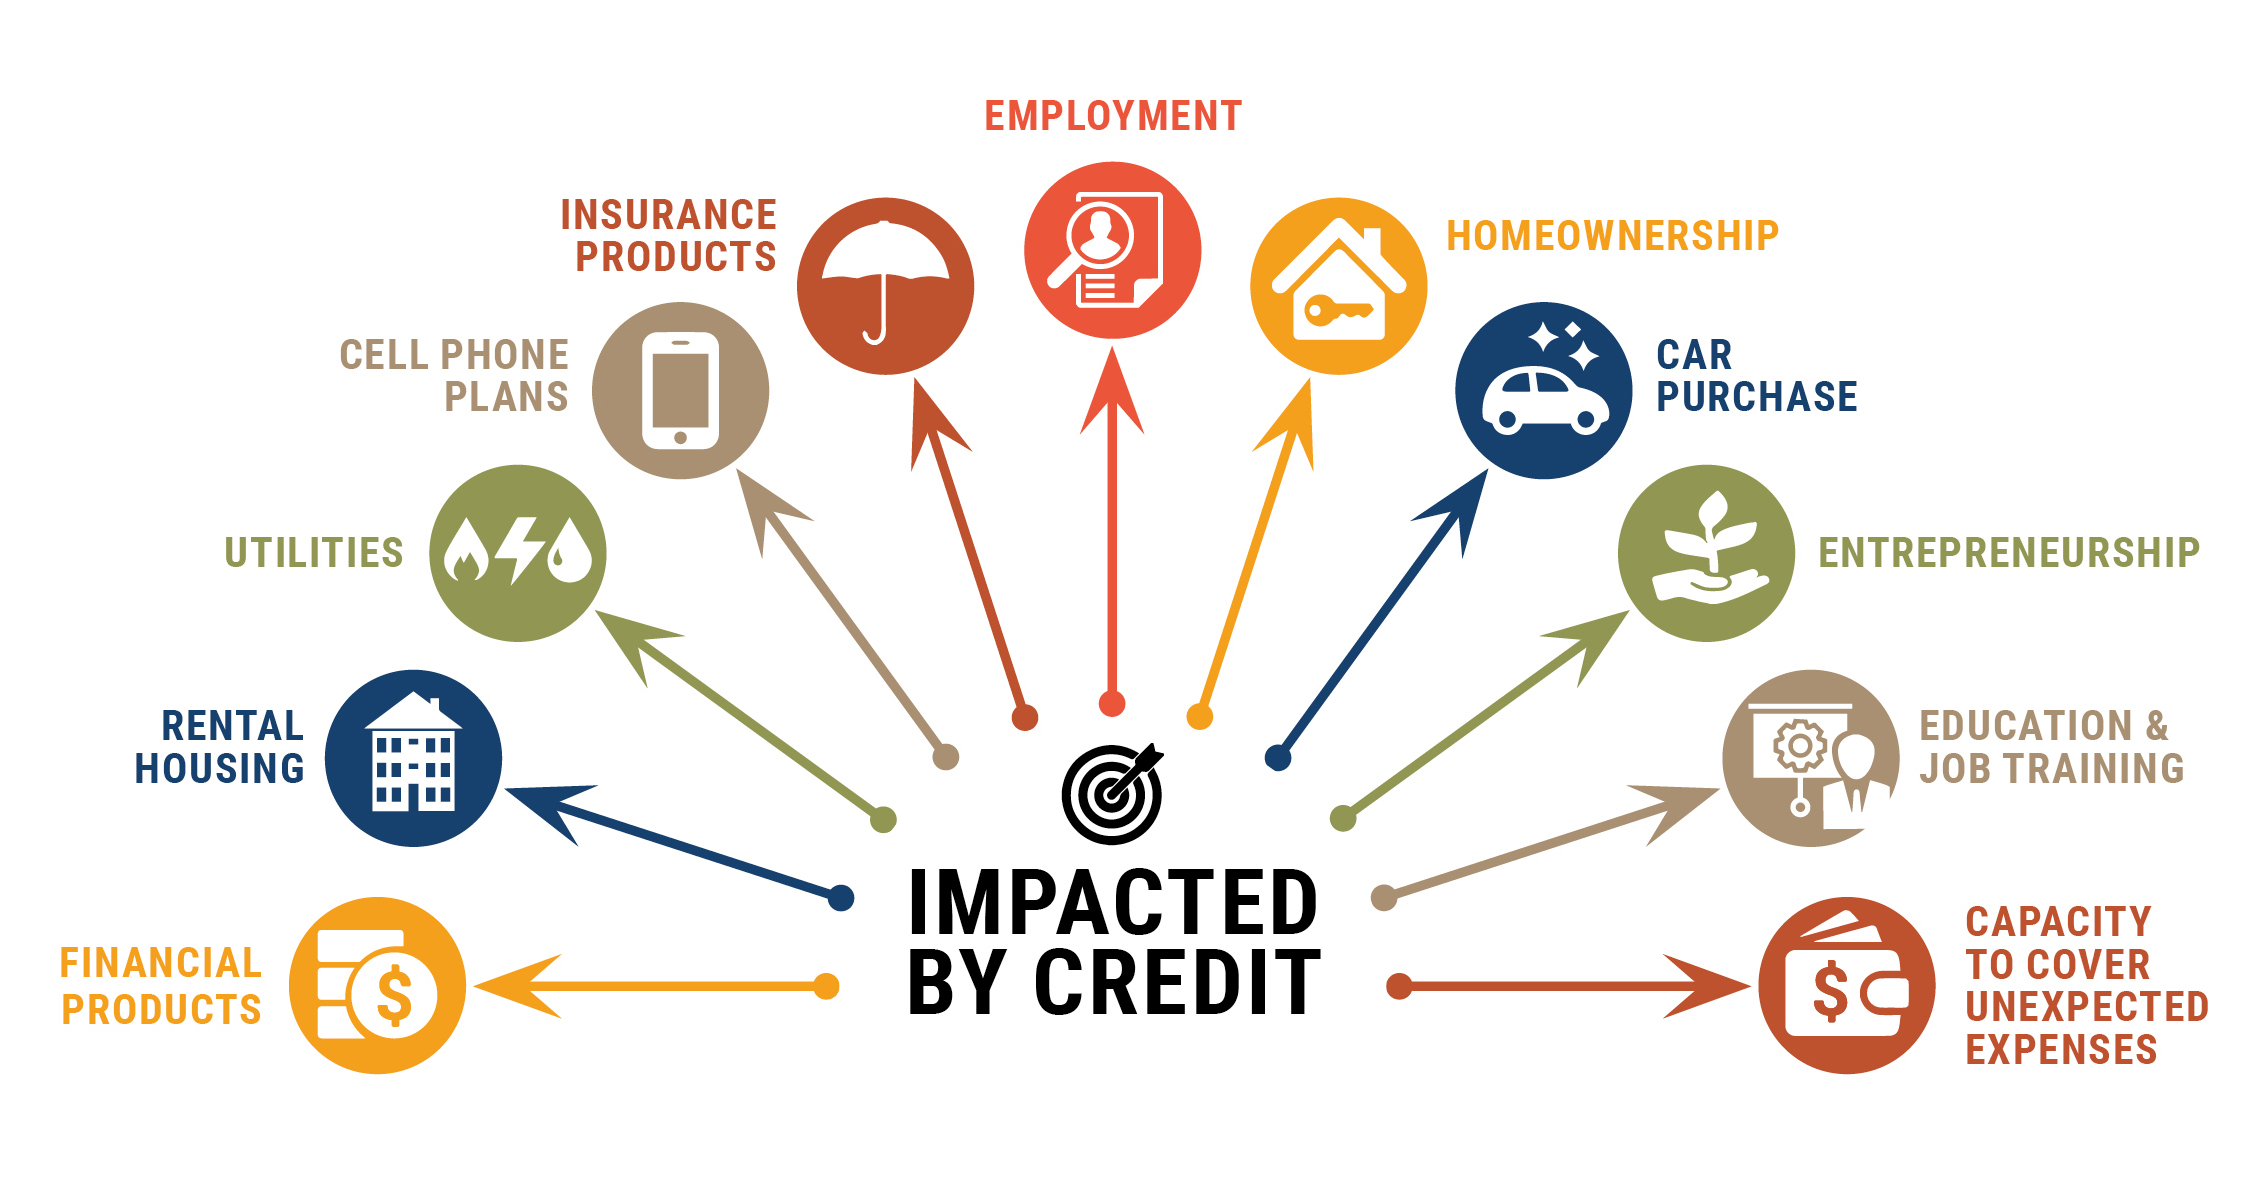 Listing of items impacted by credit (displayed as circles around a center text of Impacted by Credit. Items include:Renta Housing, home ownership, car loans, cell phone plans, education, financial products, utilities, employment